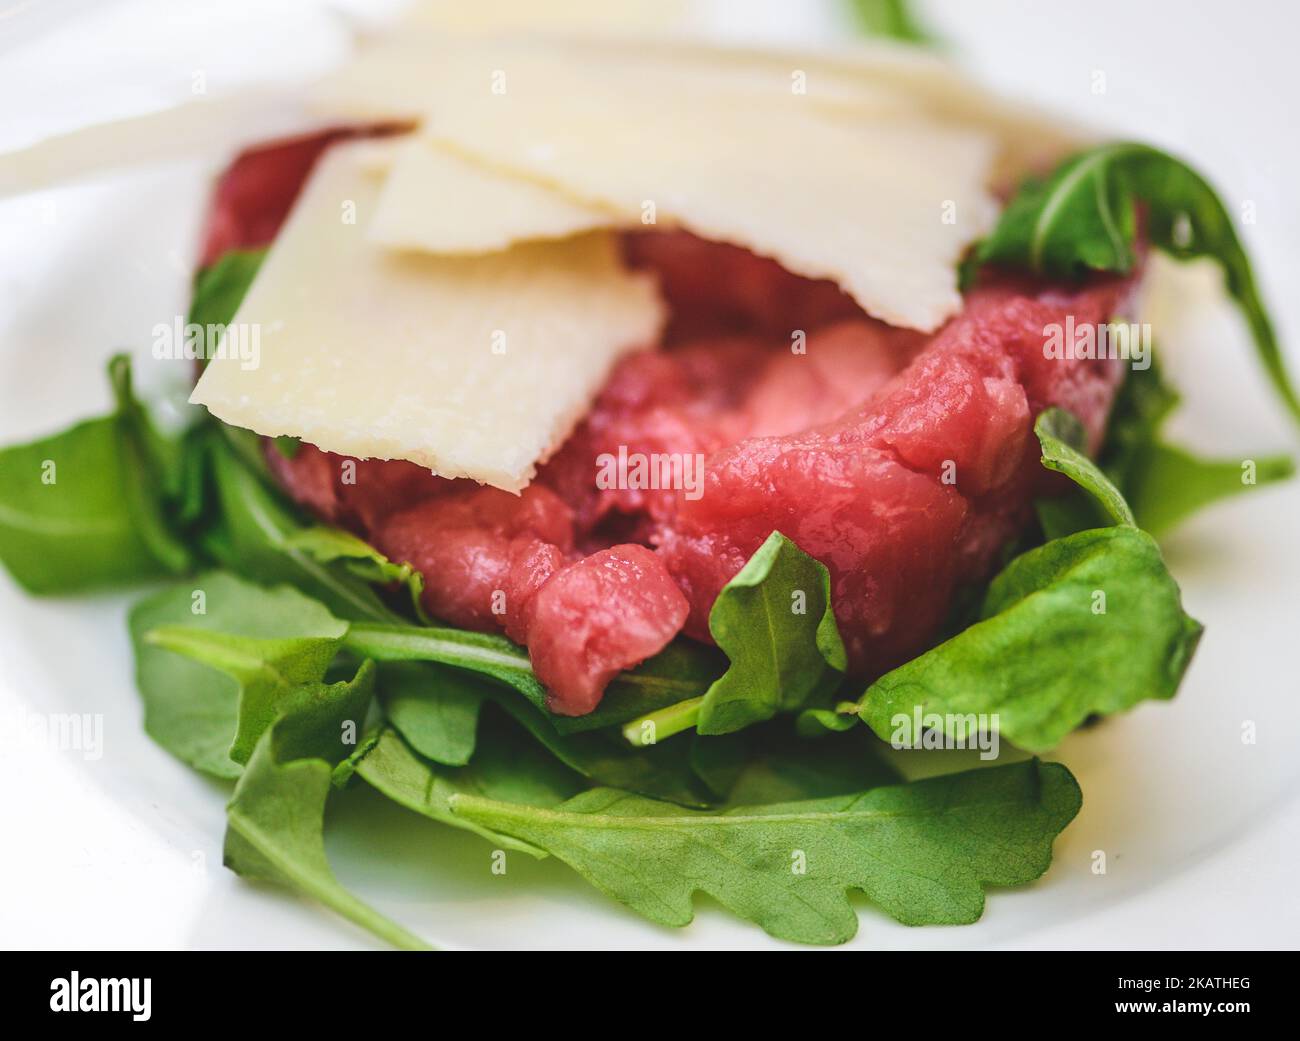 Beef  tartare or tartar steak, dish of raw ground minced beef with parmesan cheese flakes and rocket leaves just served in a white plate, close up Stock Photo